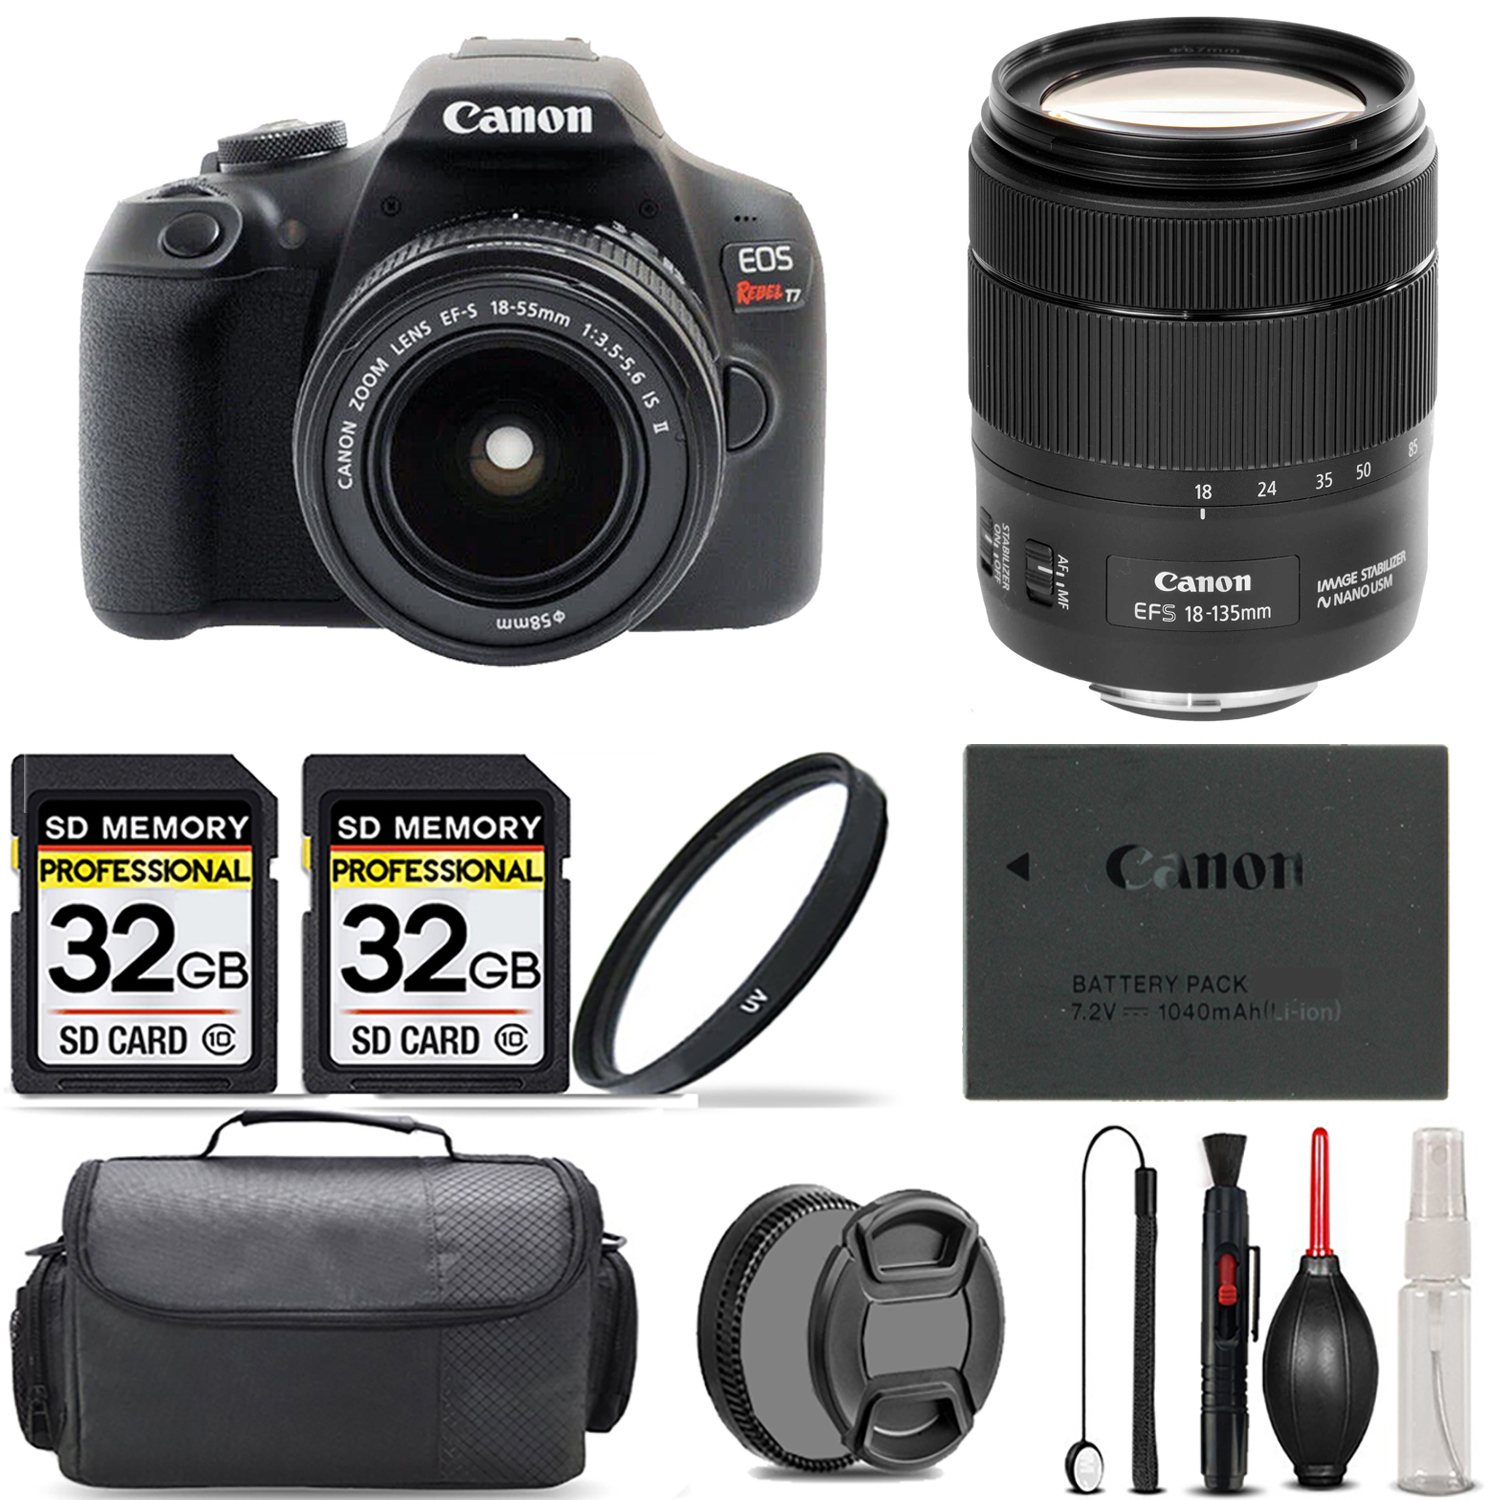 EOS Rebel T7 with 18-55mm Lens + 18-135mm IS USM Lens + UV Filter + 64GB + Bag *FREE SHIPPING*